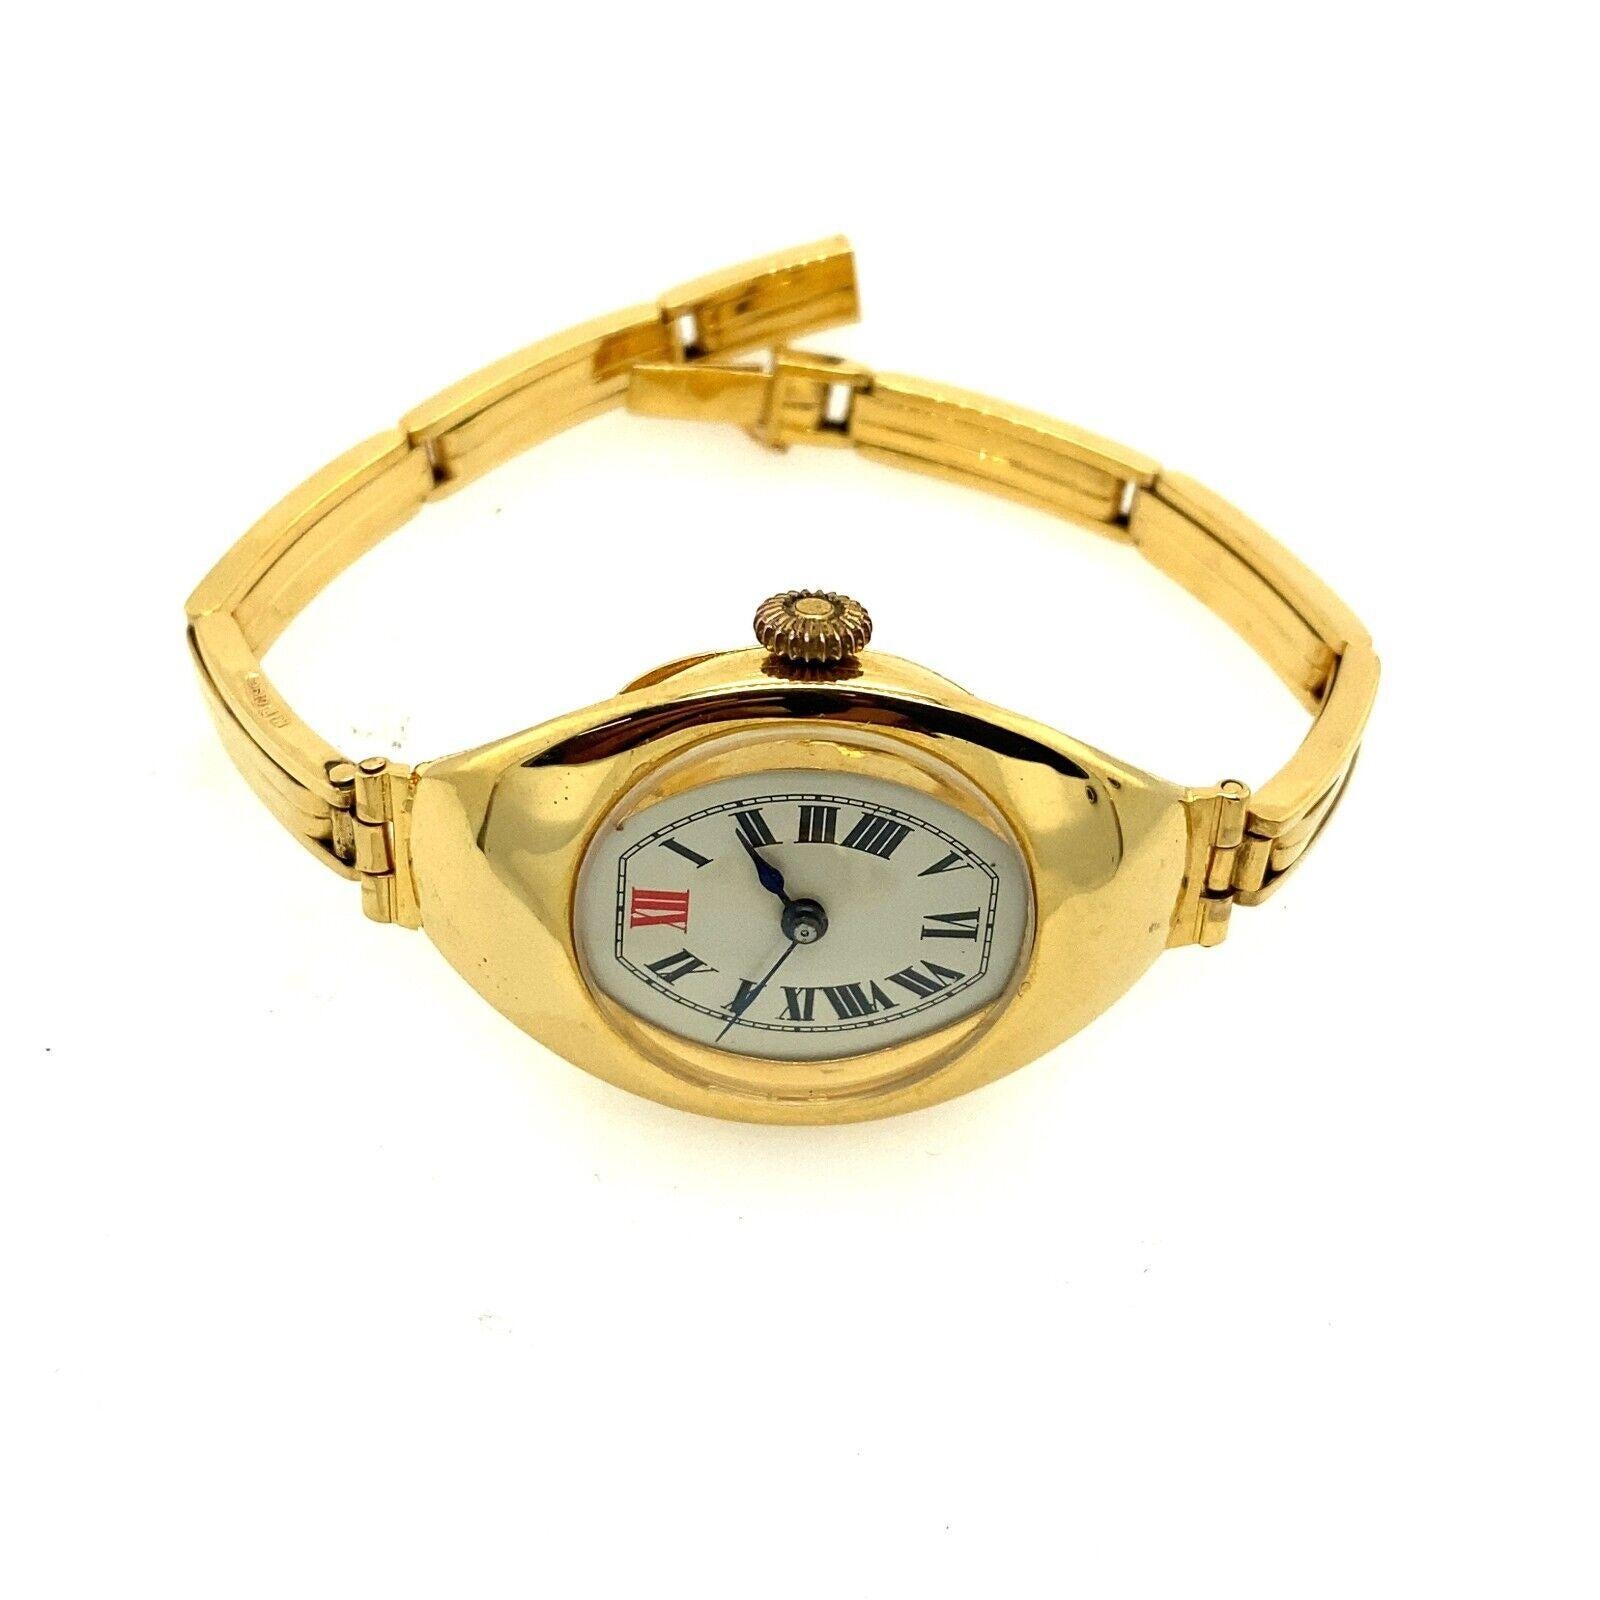 Stretchy bracelet, that can fit any wrist.

Additional Information:
Case Size: 38mm x 24.90mm
Case Thickness: 35mm
Case Material: 9ct Gold
Strap Width: 4mm
Lug Width: 40mm
Water Resistance: Not Water Resistant
Total Weight: 15.3g
Length: 7